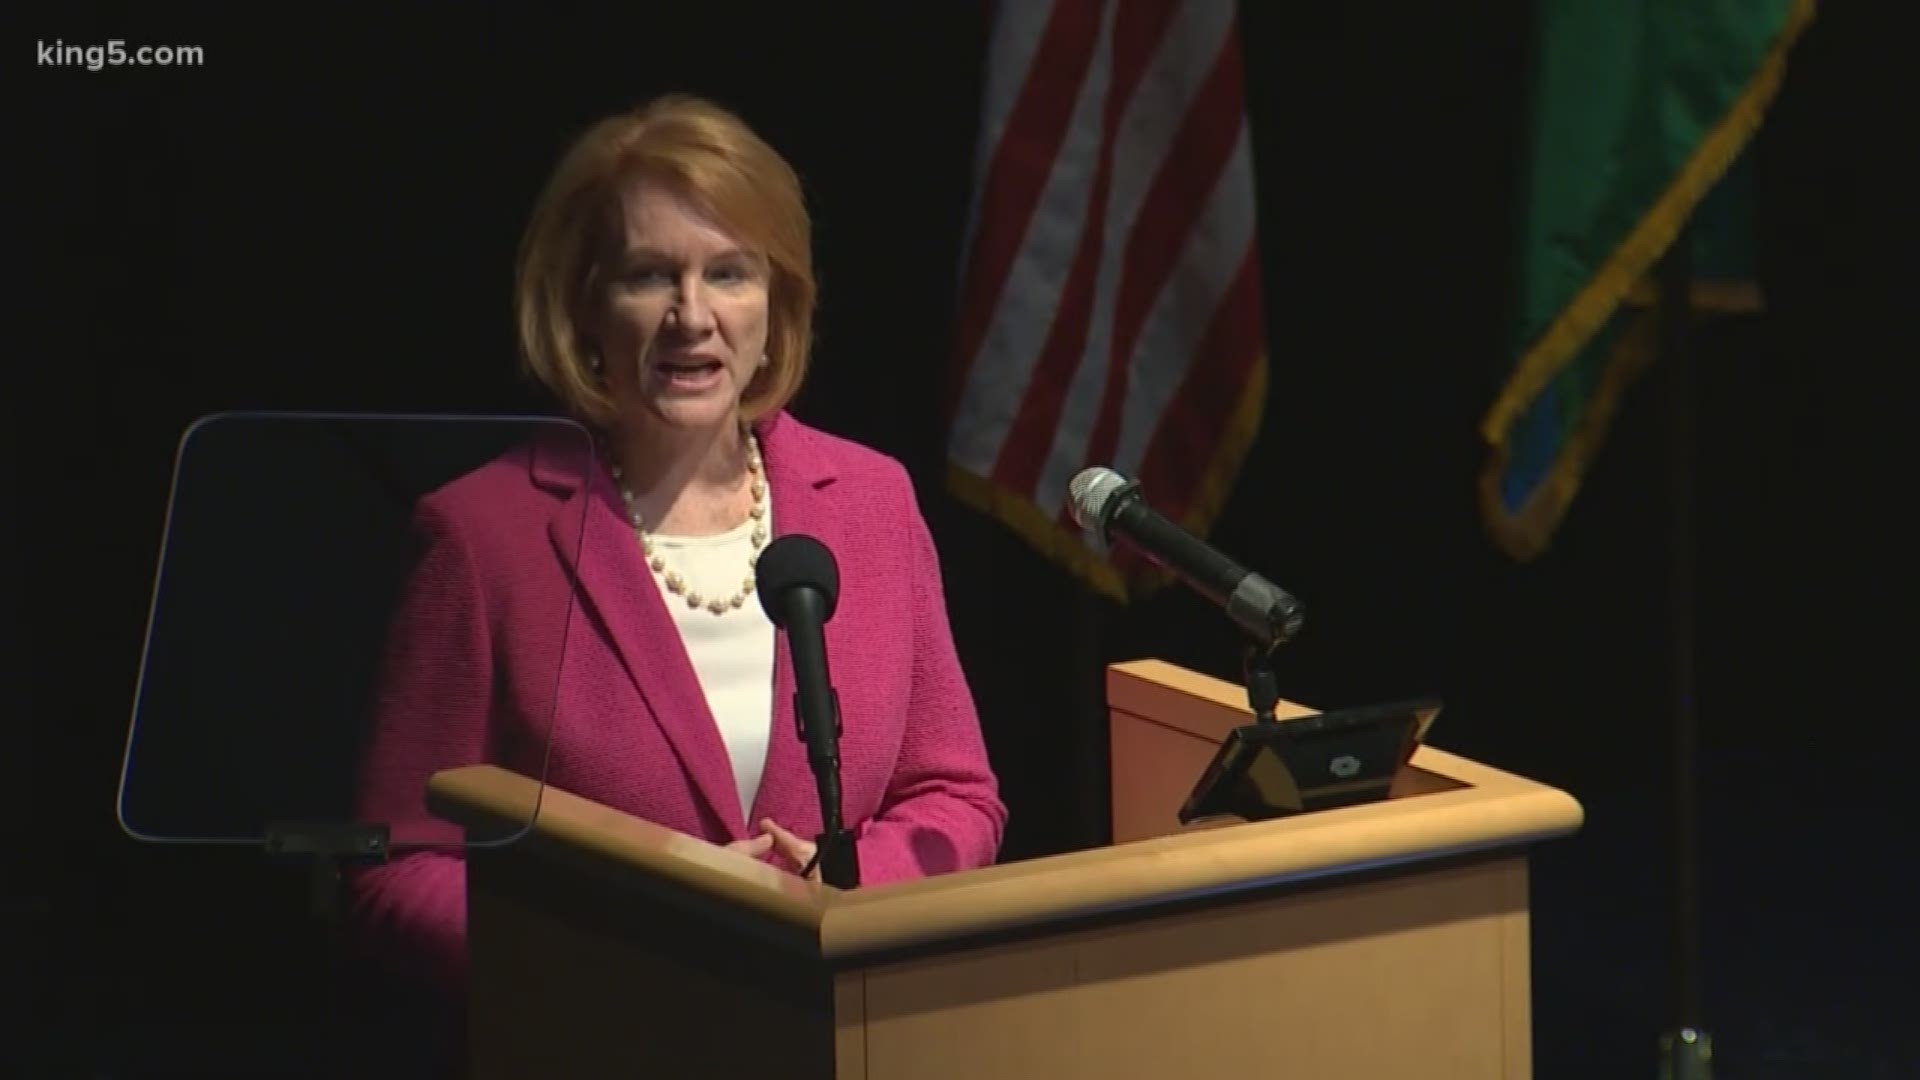 Seattle Mayor Jenny Durkan honors the city's Navigation Team for their efforts during the recent snowstorm during her 2019 State of the City address at North Seattle College on February 19, 2019.